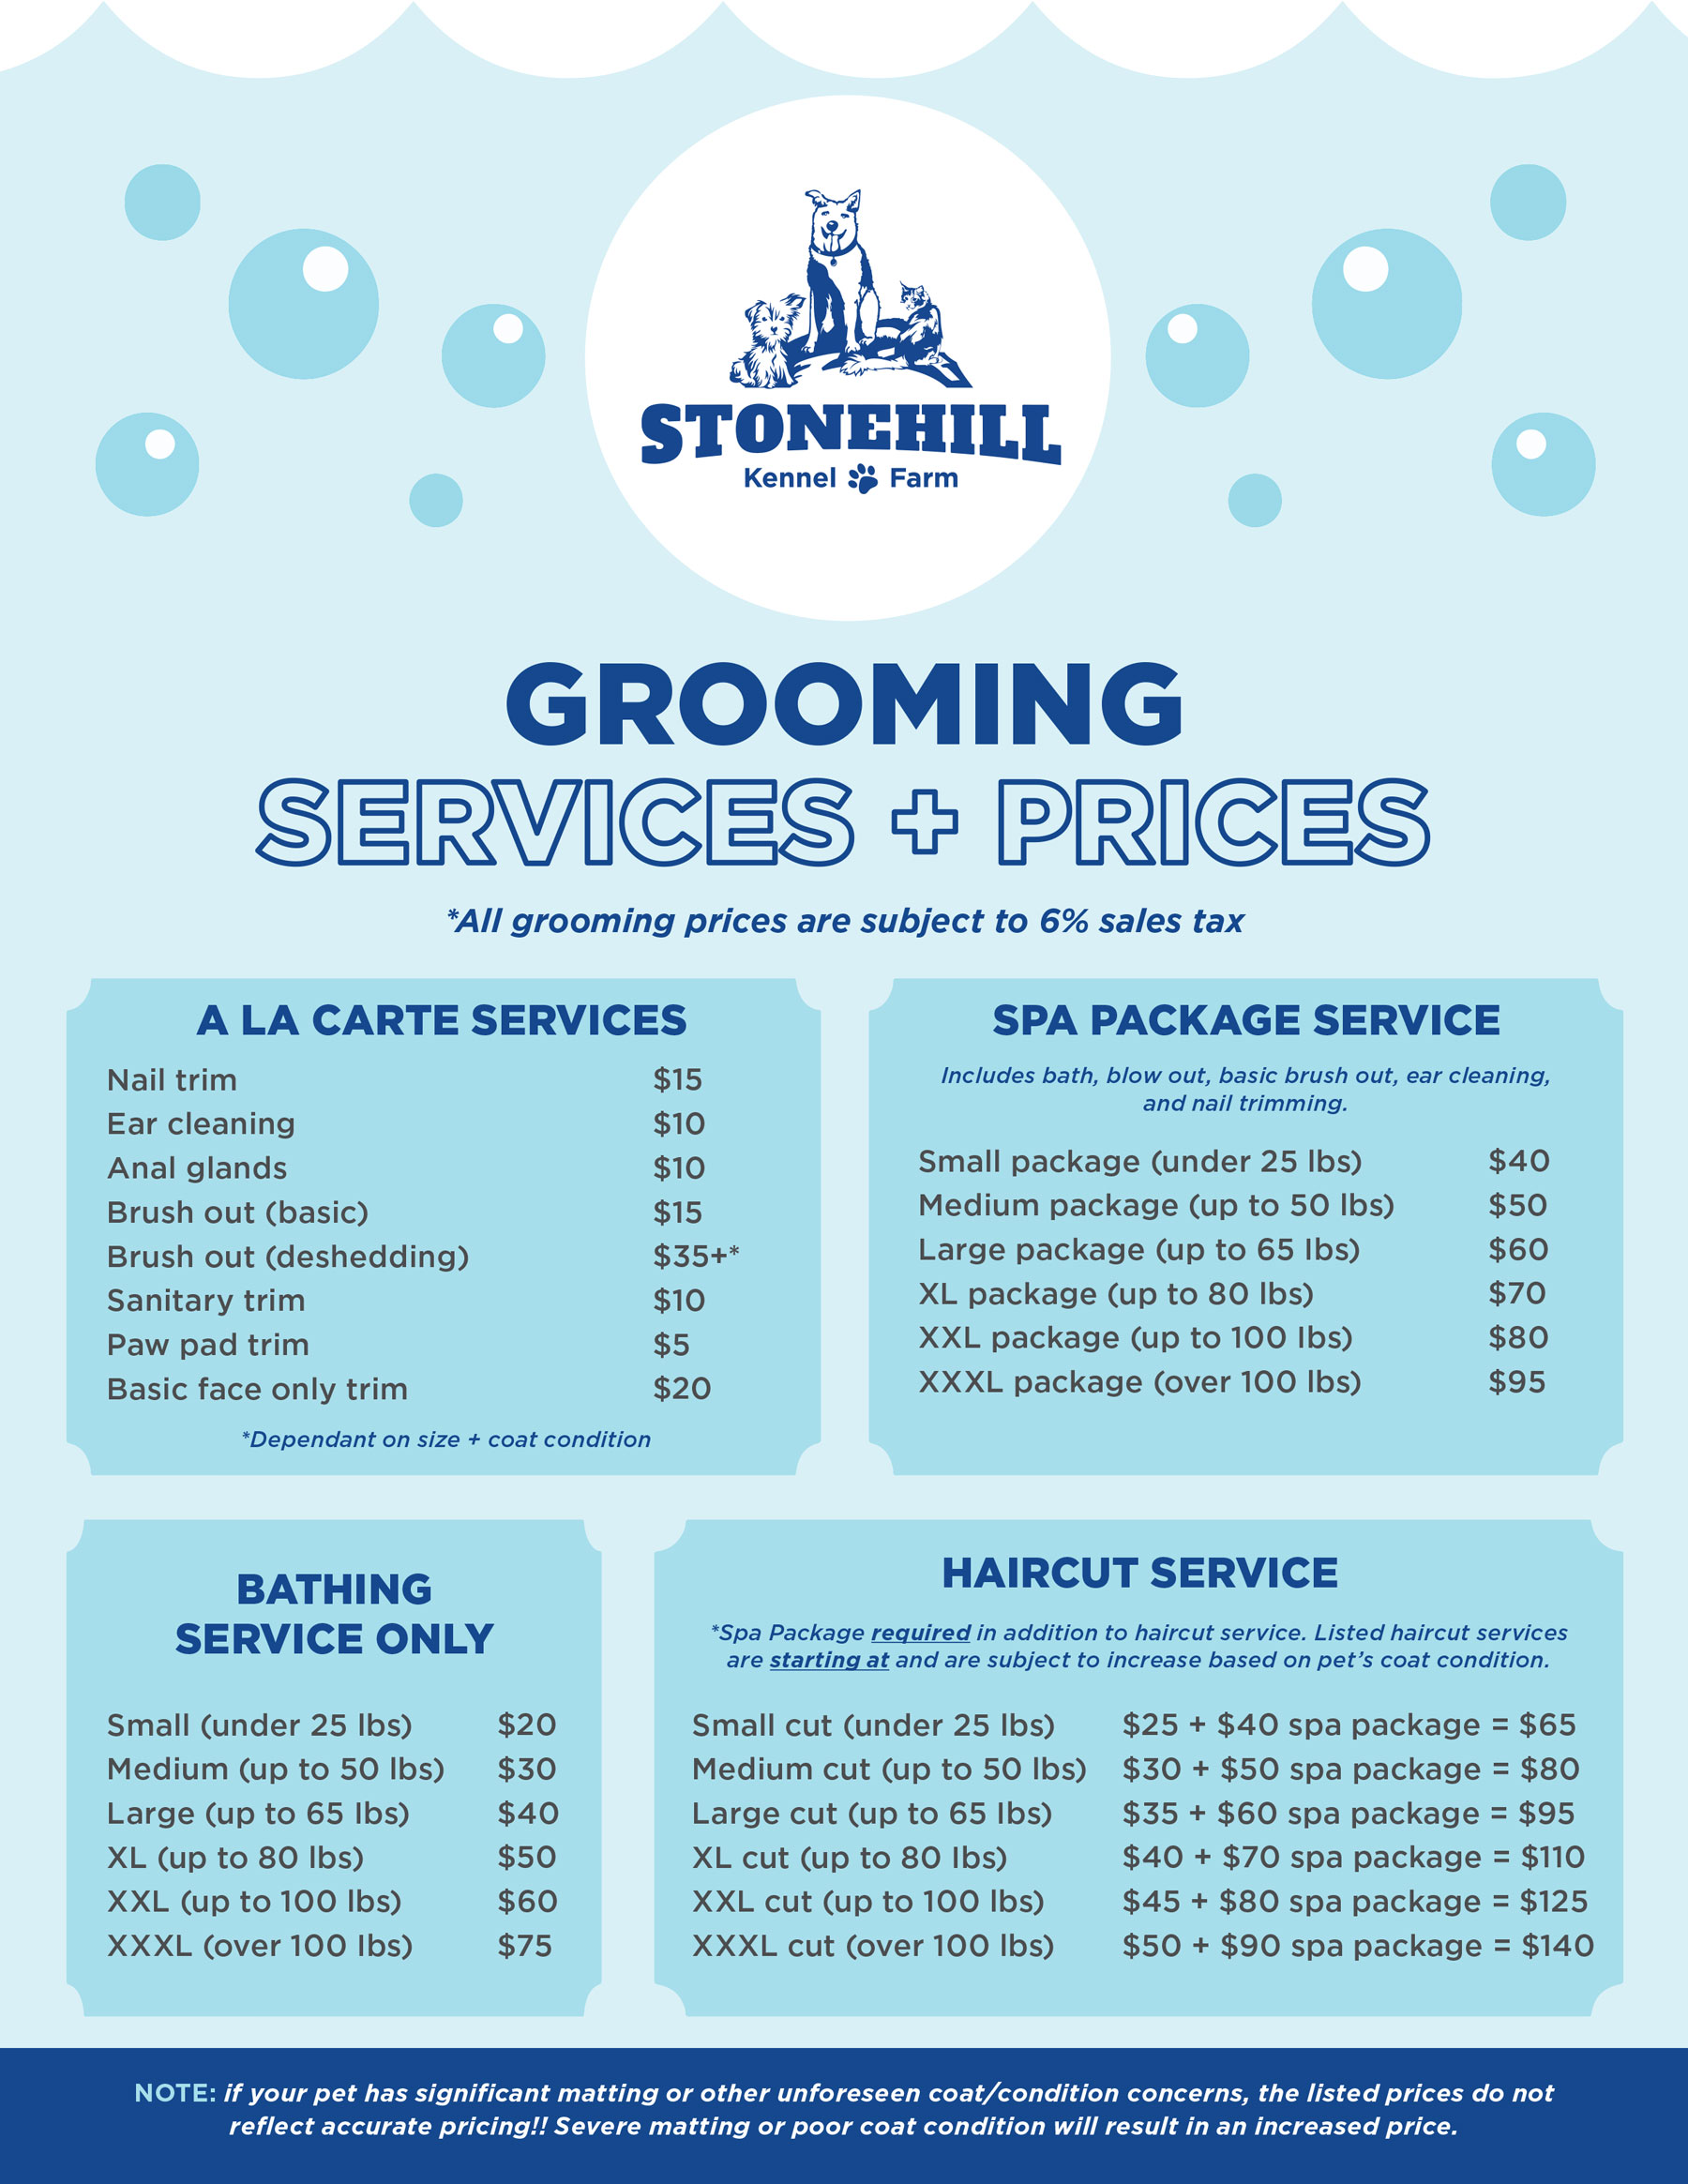 Stonehill Kennel and Farm Services and Prices